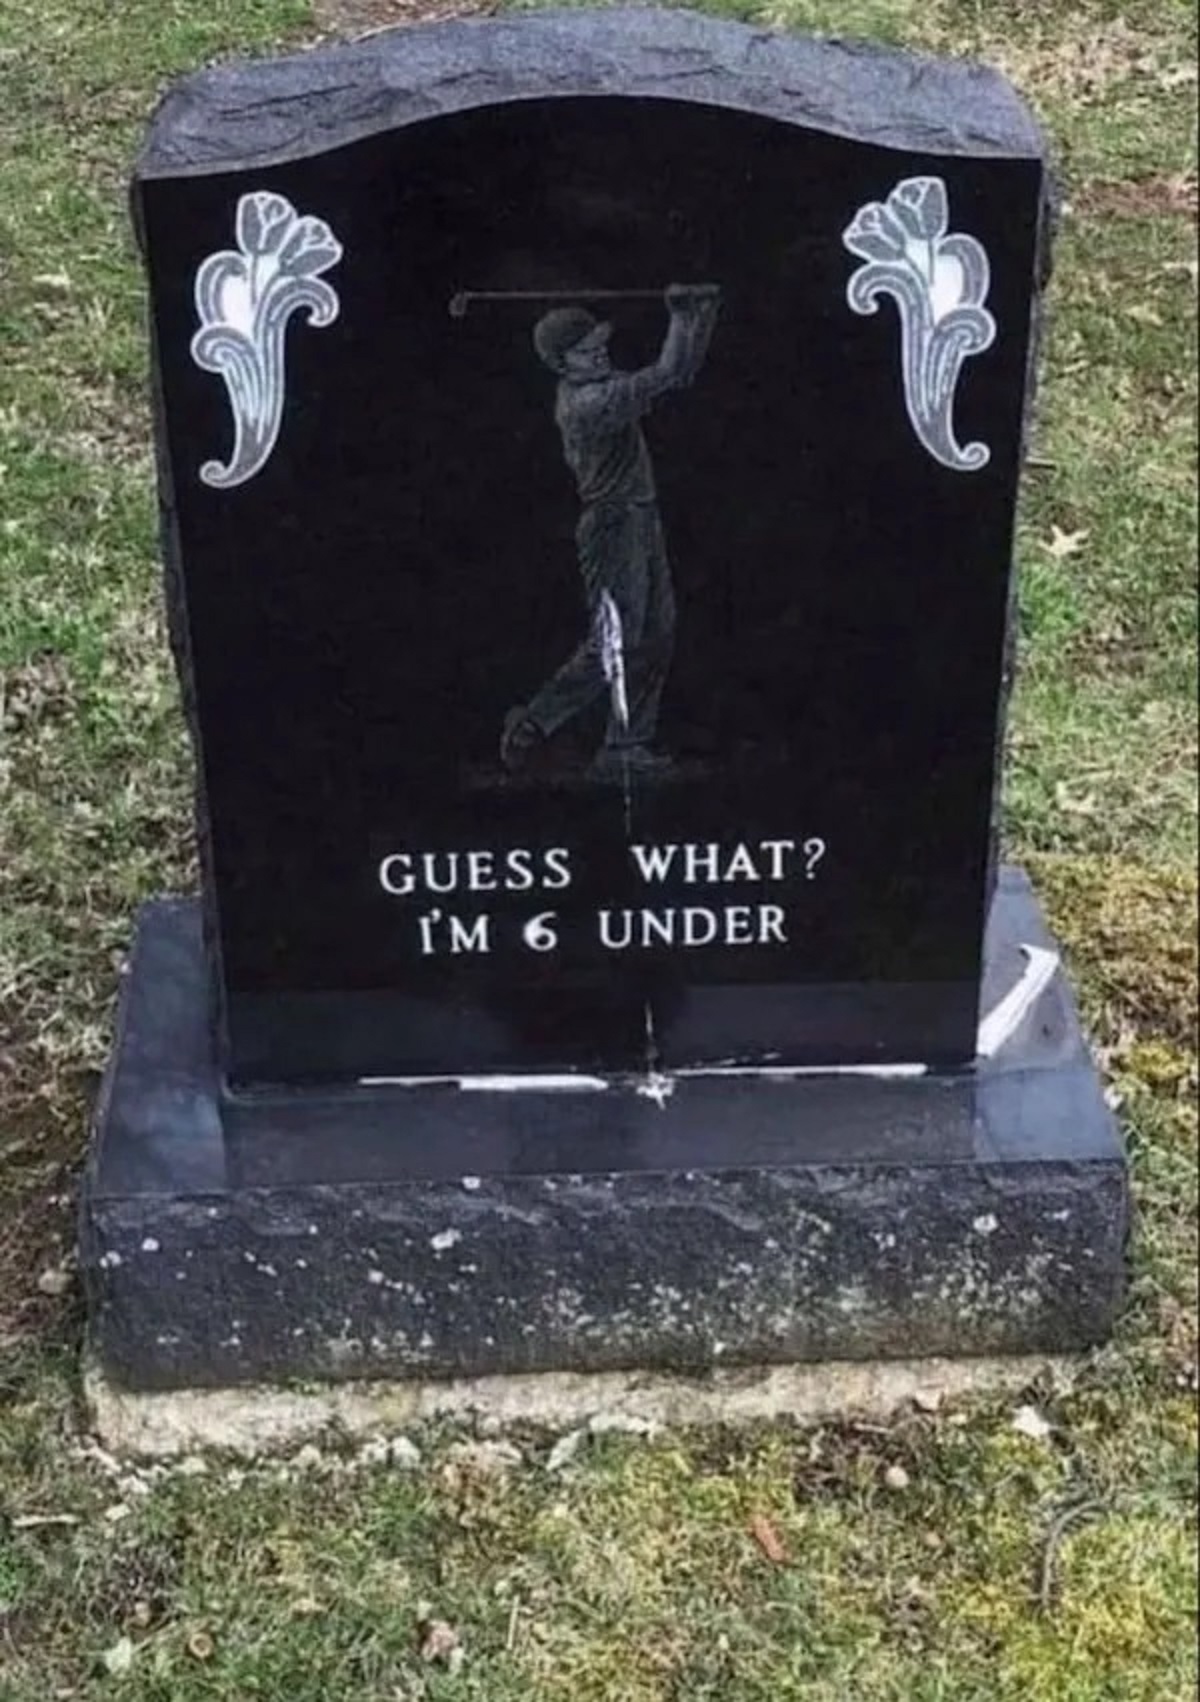 6 under tombstone - Guess What? I'M 6 Under